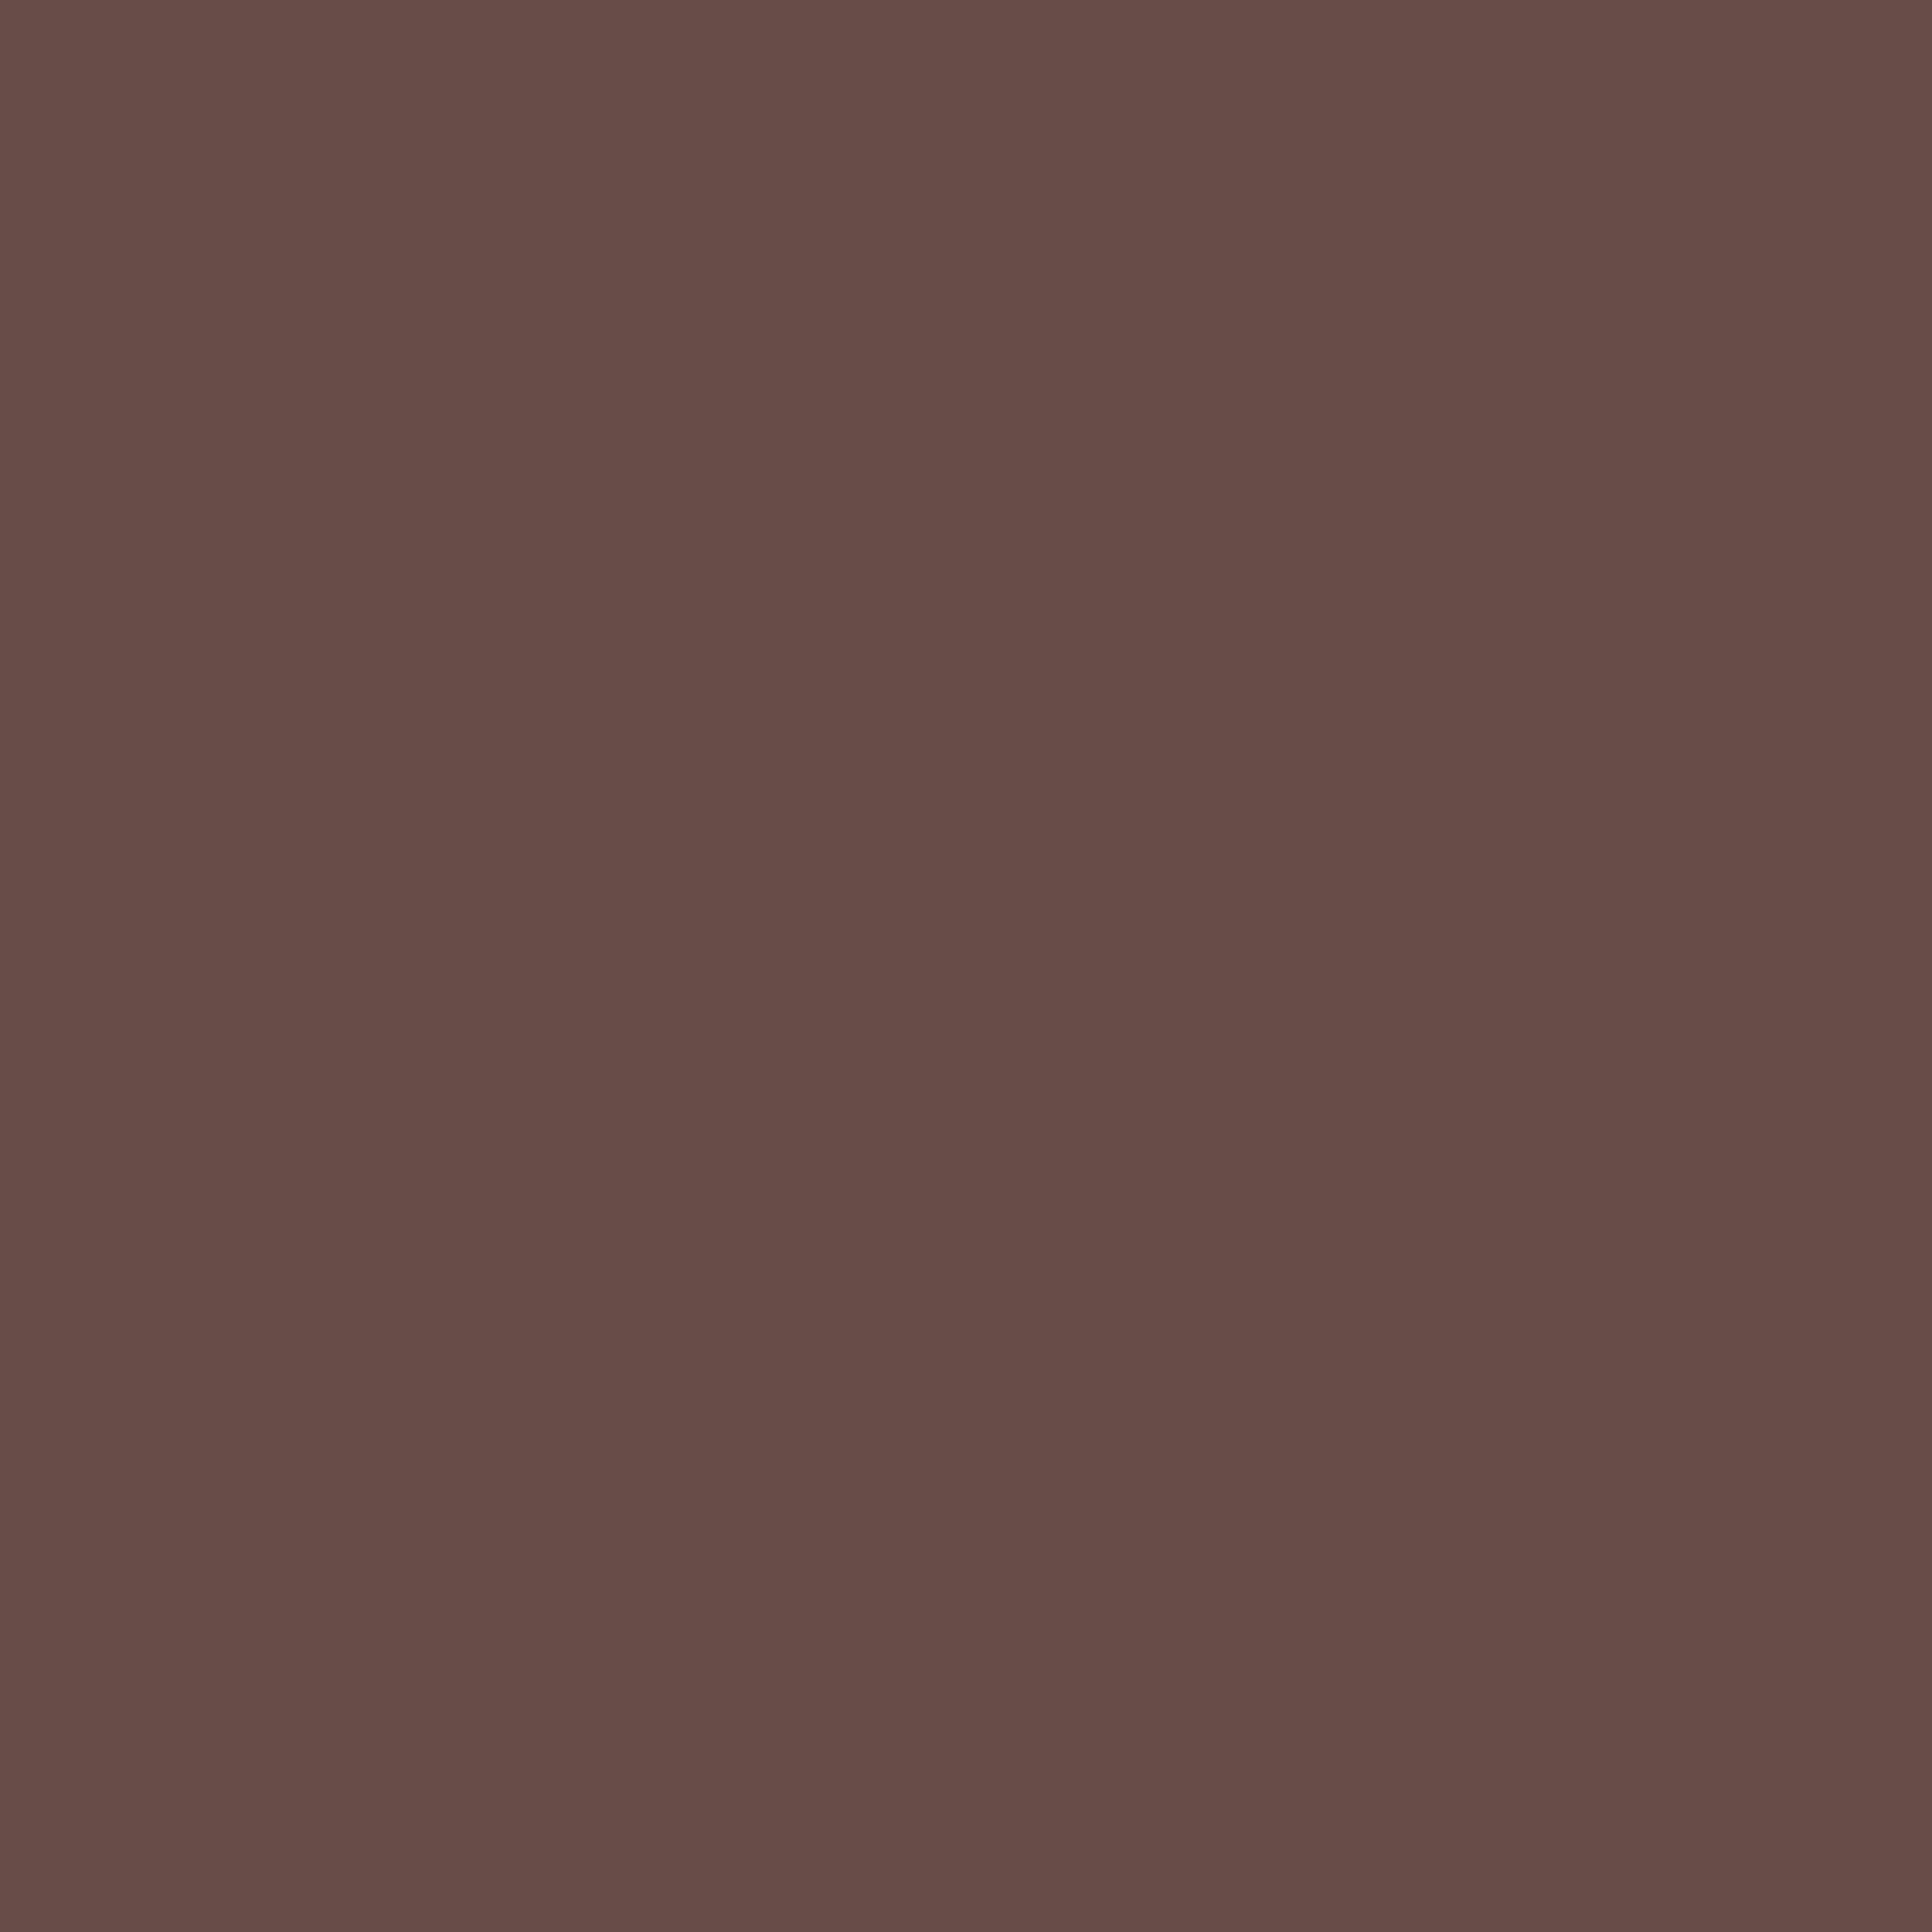 3600x3600 Medium Taupe Solid Color Background